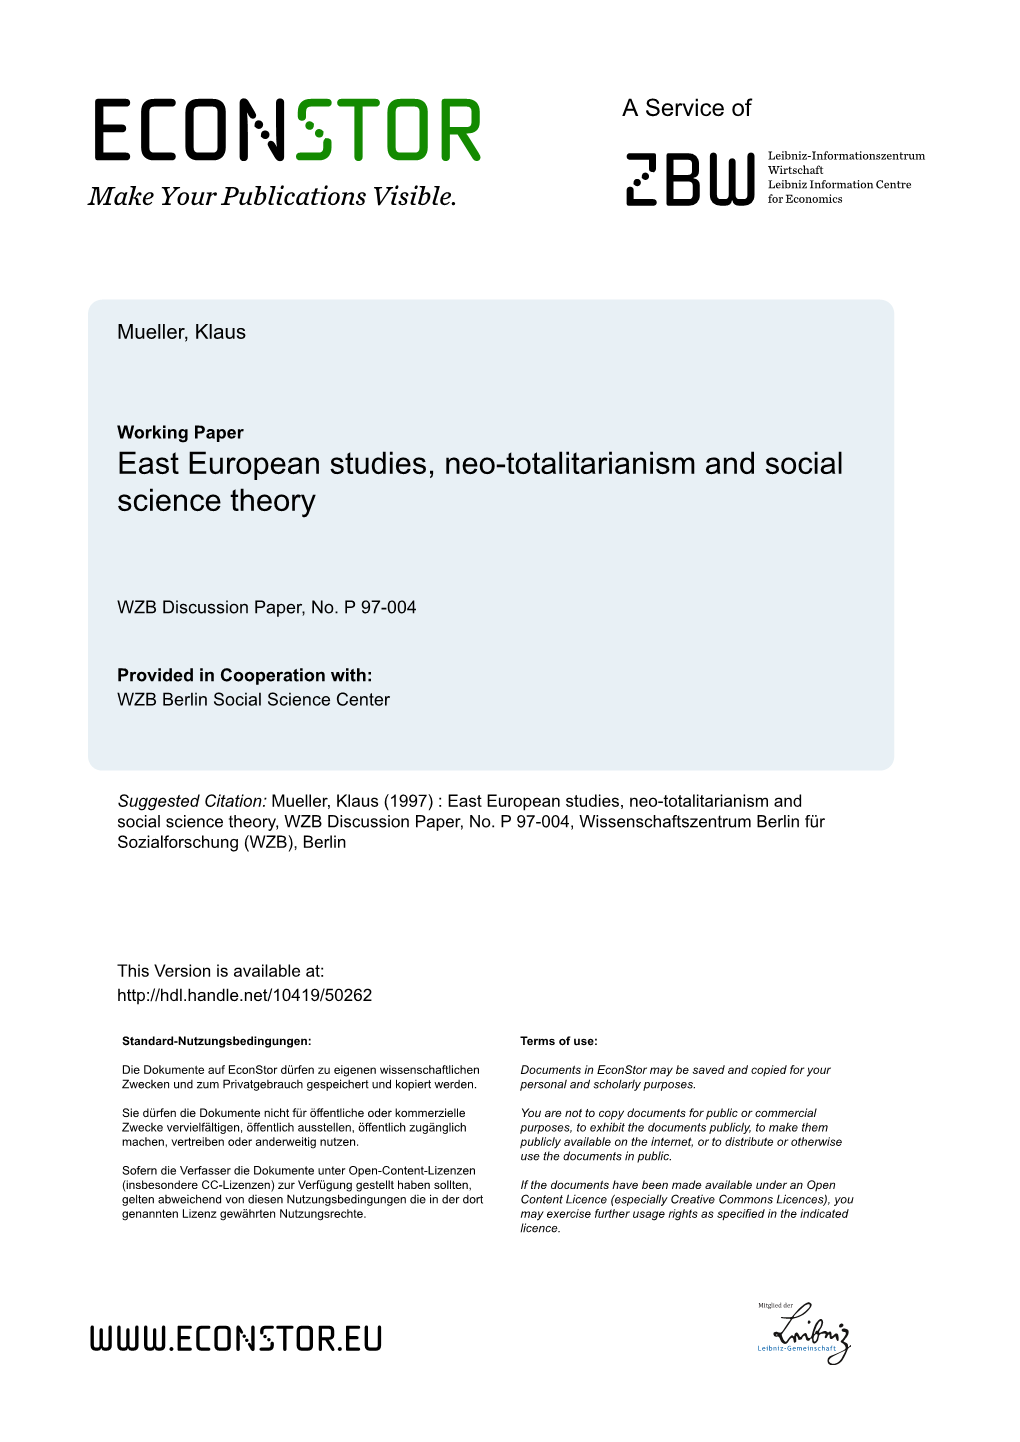 East European Studies, Neo-Totalitarianism and Social Science Theory